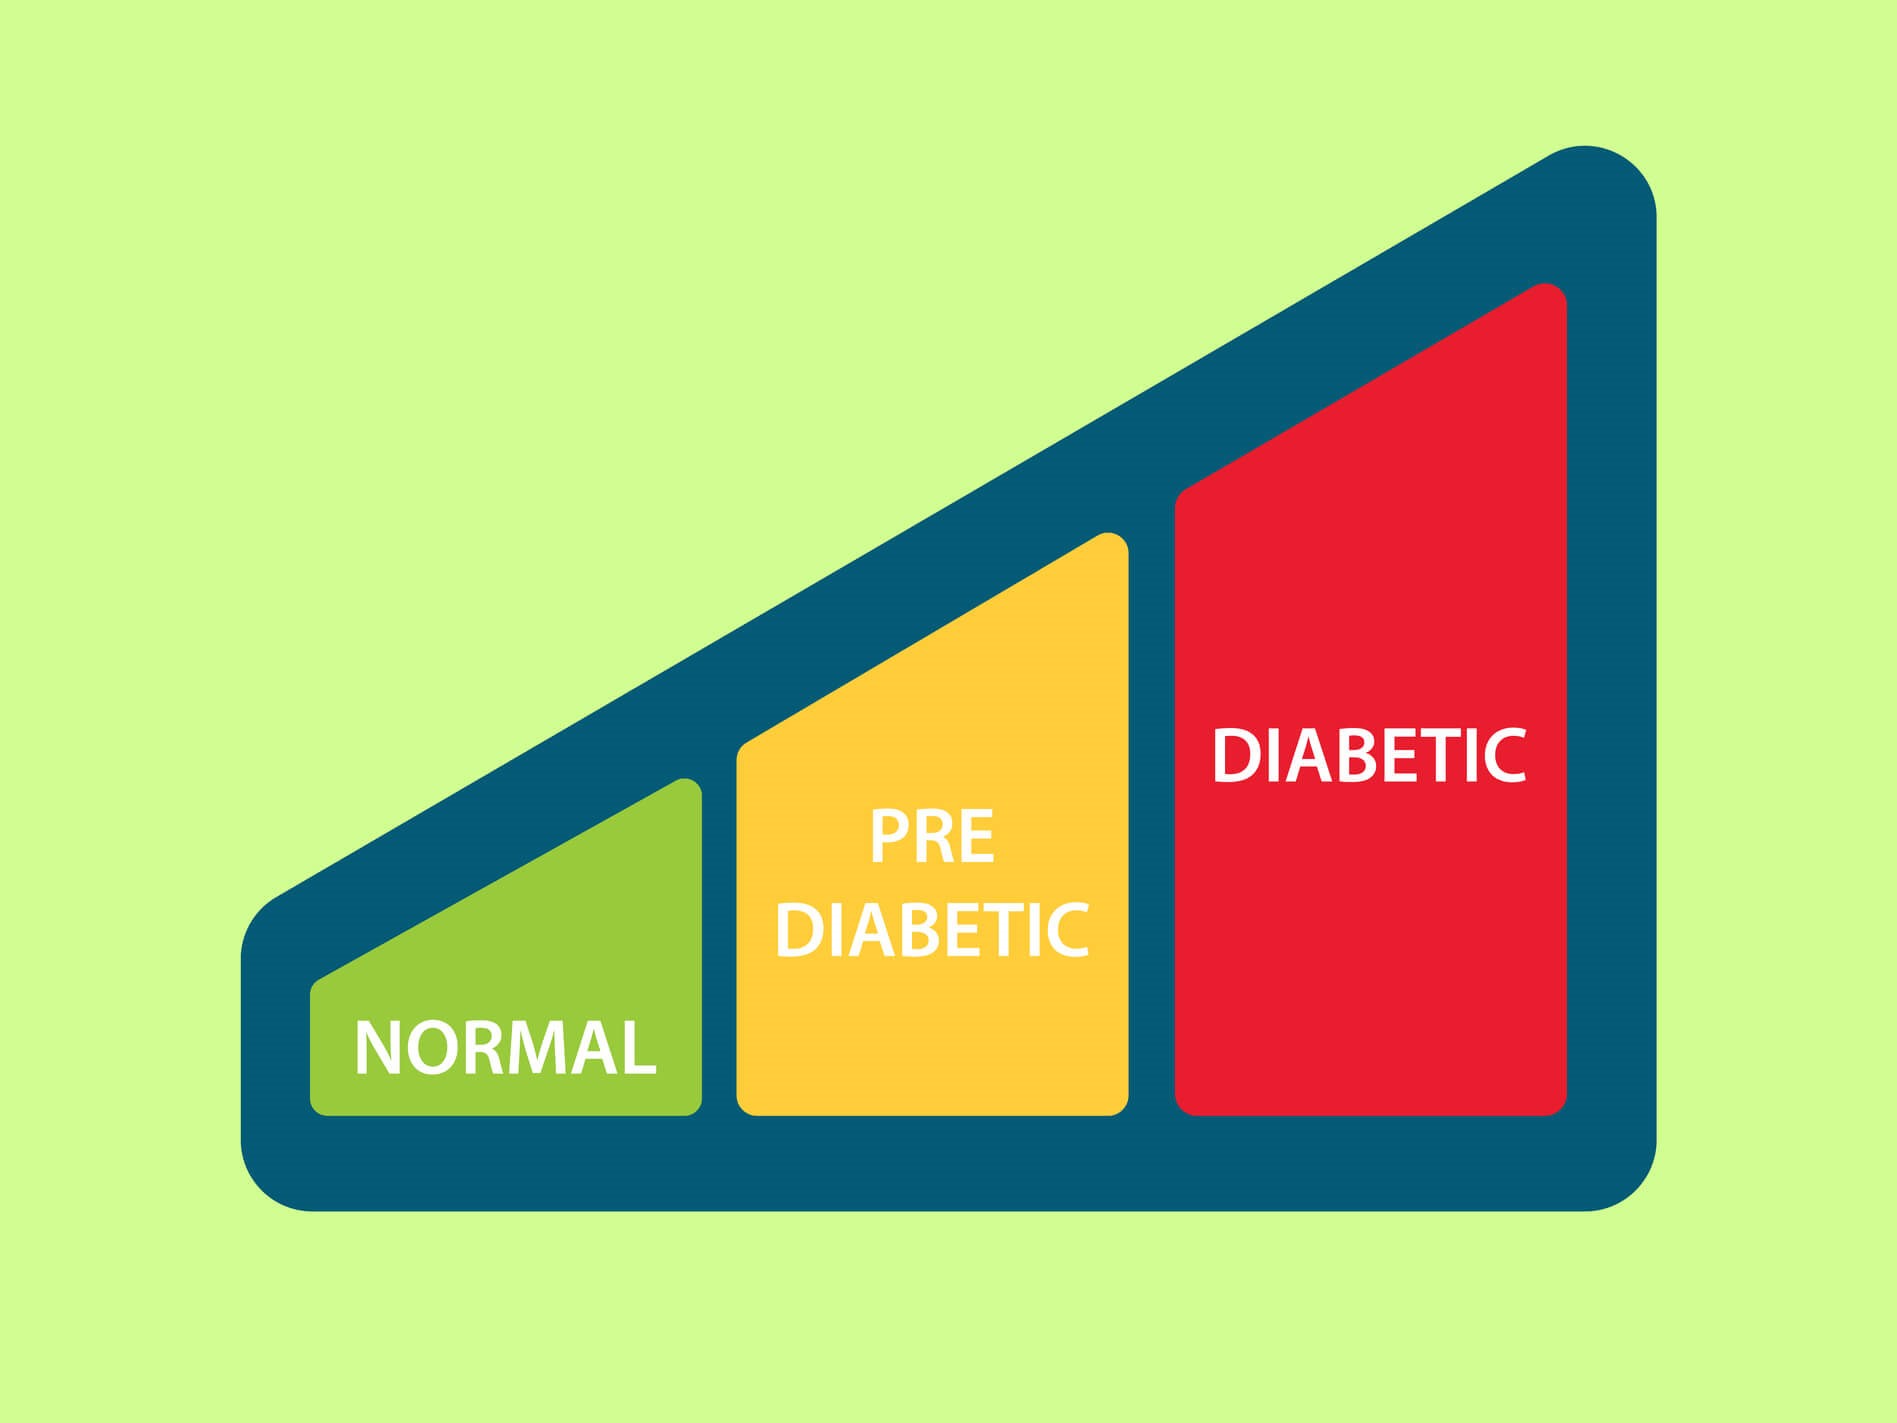 Diabetes…is it a diagnosis for life?